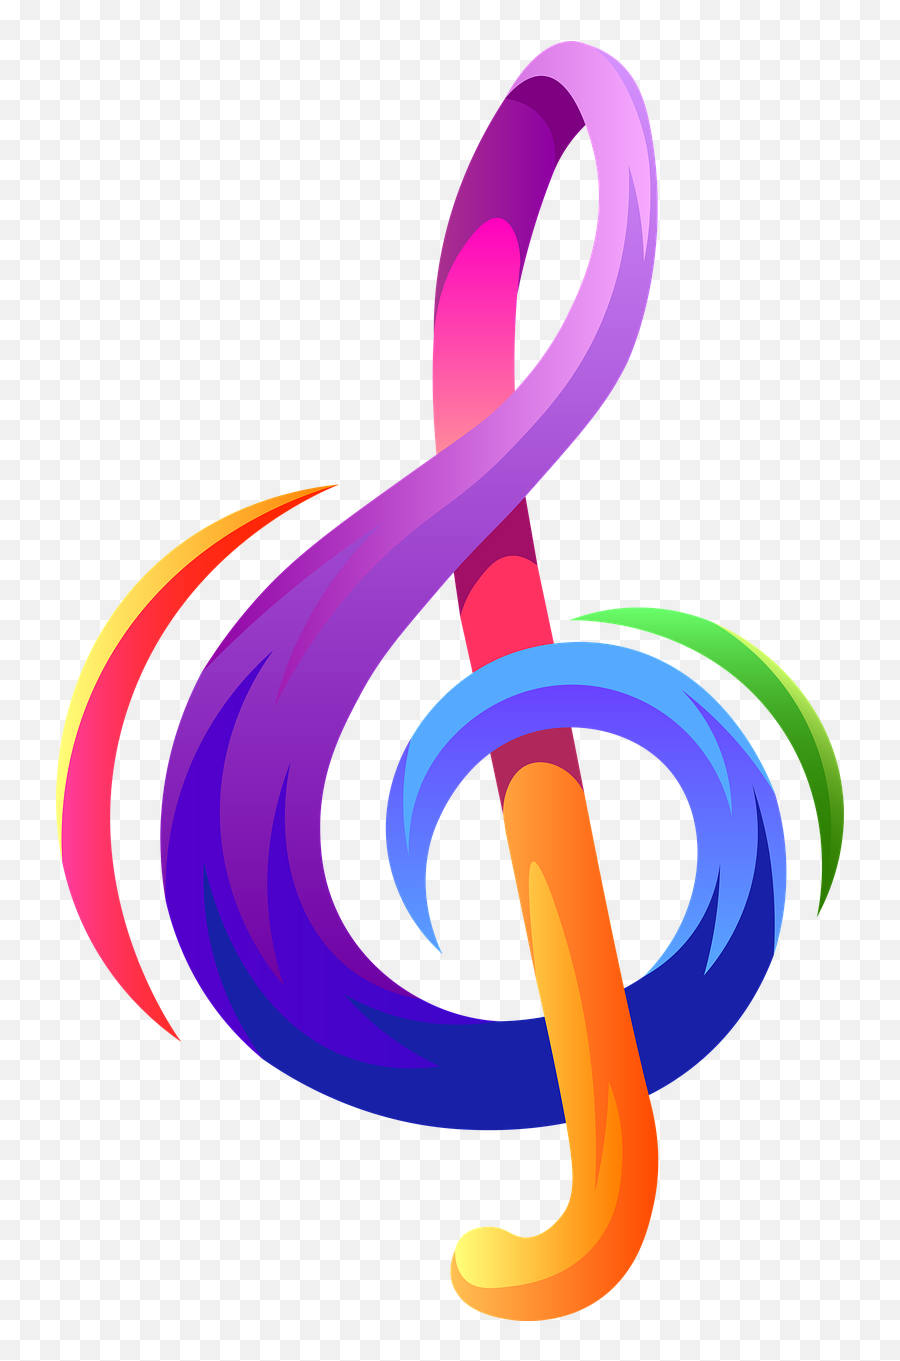 Treble Clef Music Song - Free Image On Pixabay Design Music Logo Png,Treble Clef Icon